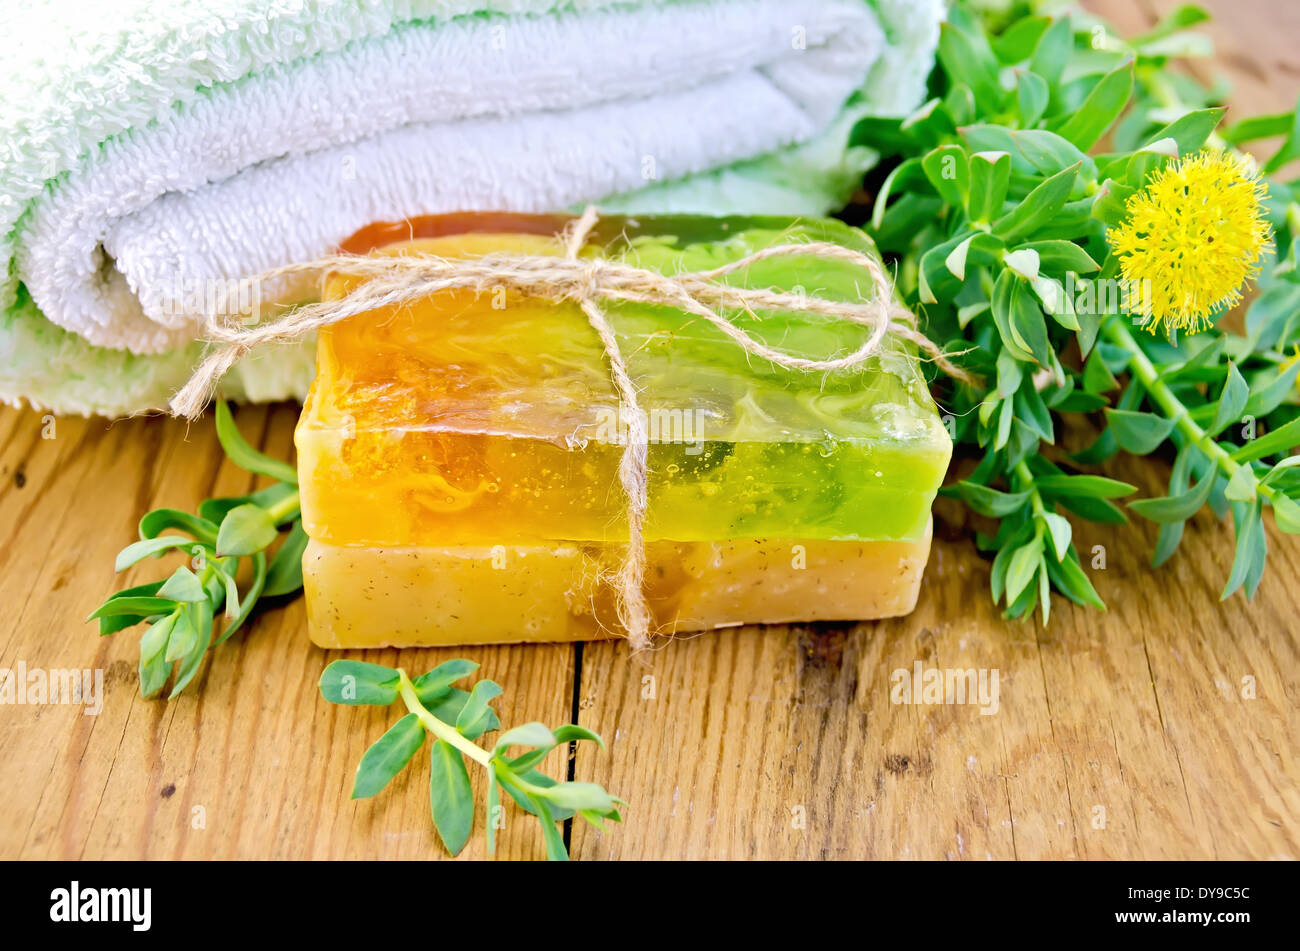 Two pieces of homemade soap, tied with twine with Rhodiola rosea flowers on a background of wooden boards Stock Photo